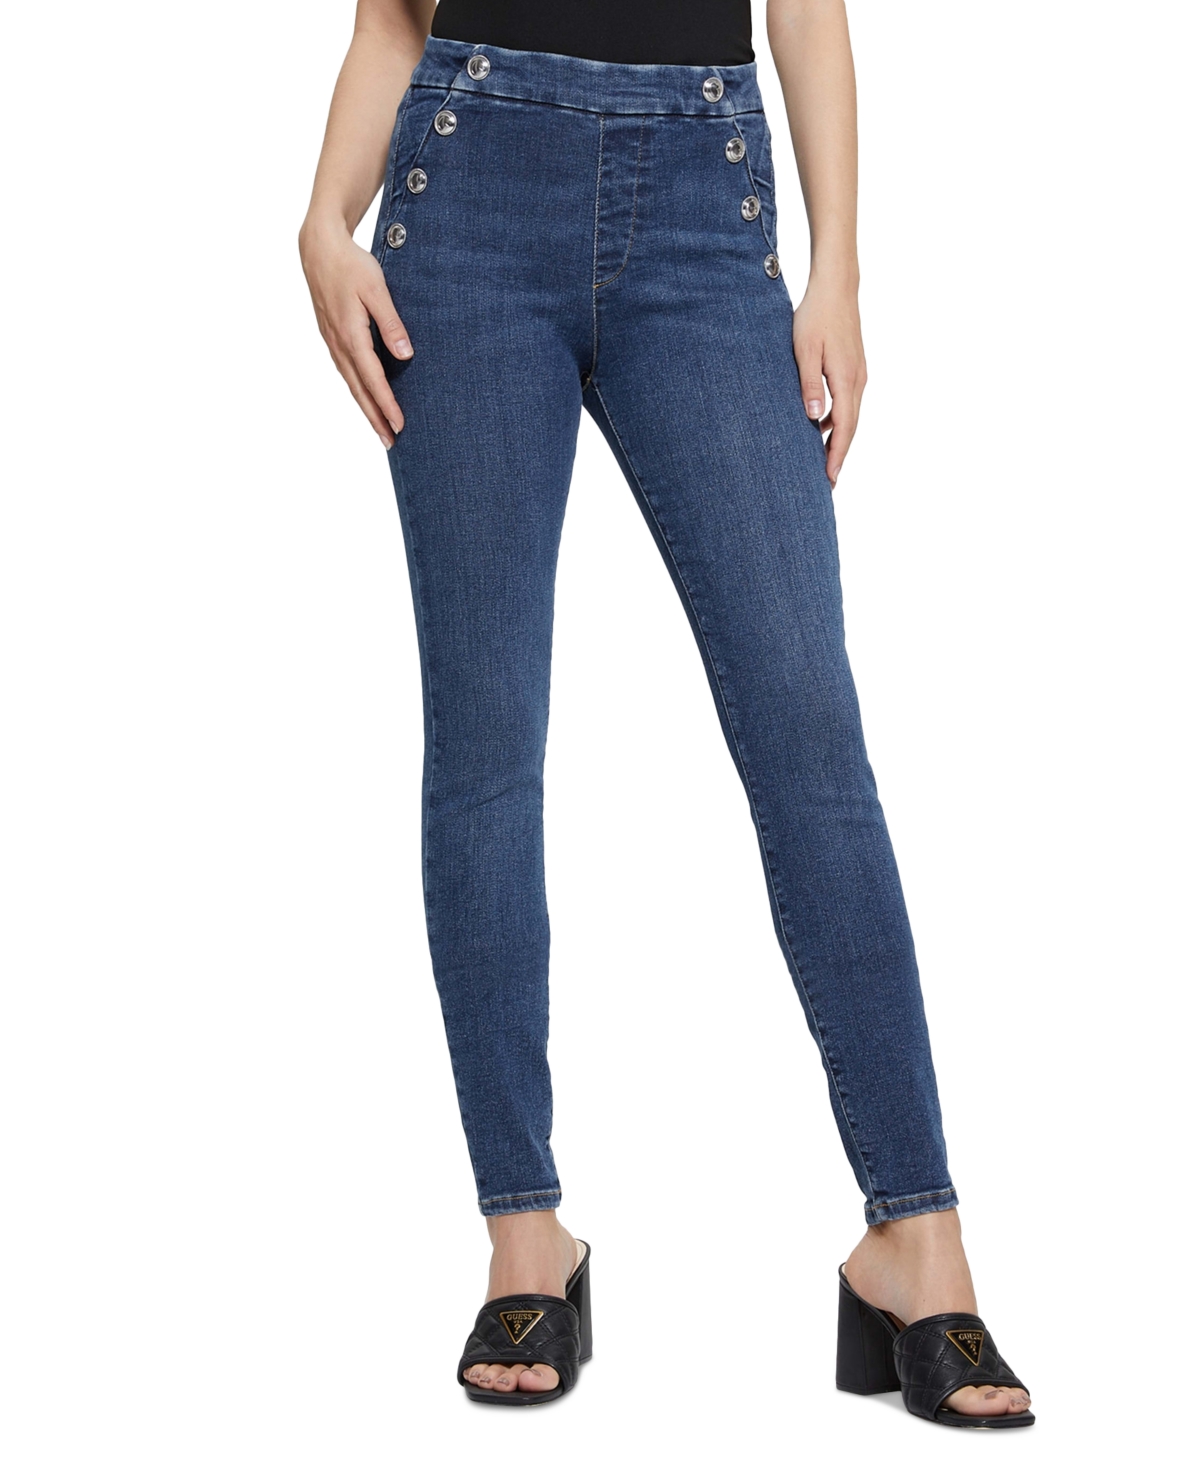 Women's Aubree High Rise Pull-On Skinny Jeans - MECCA